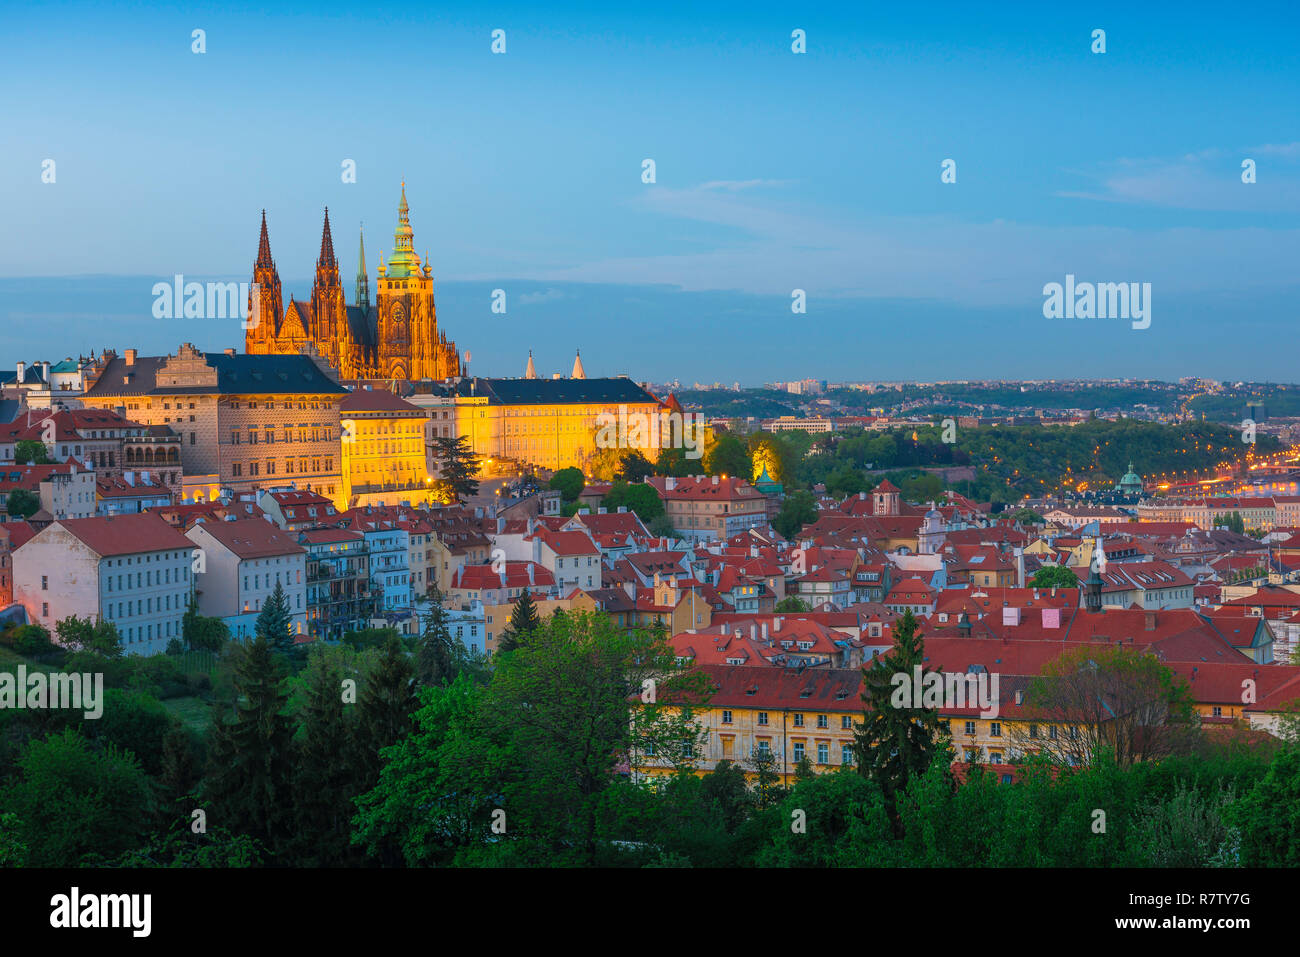 Prague Castle night, early evening view of the illuminated Hradcany Castle district in Prague, Czech Republic. Stock Photo